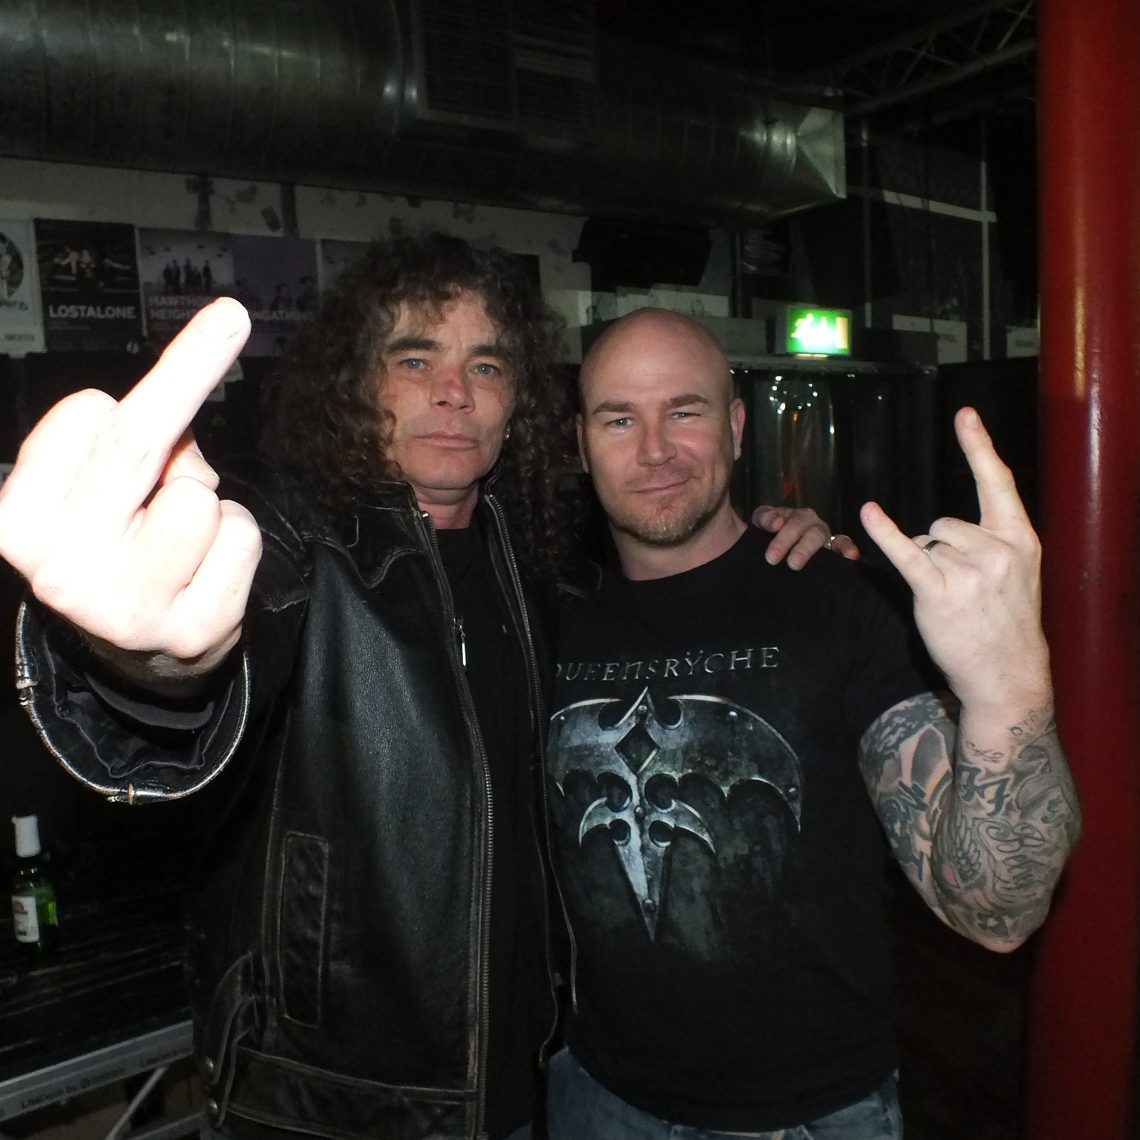 Interview with Overkill front man Bobby “Blitz” Ellsworth